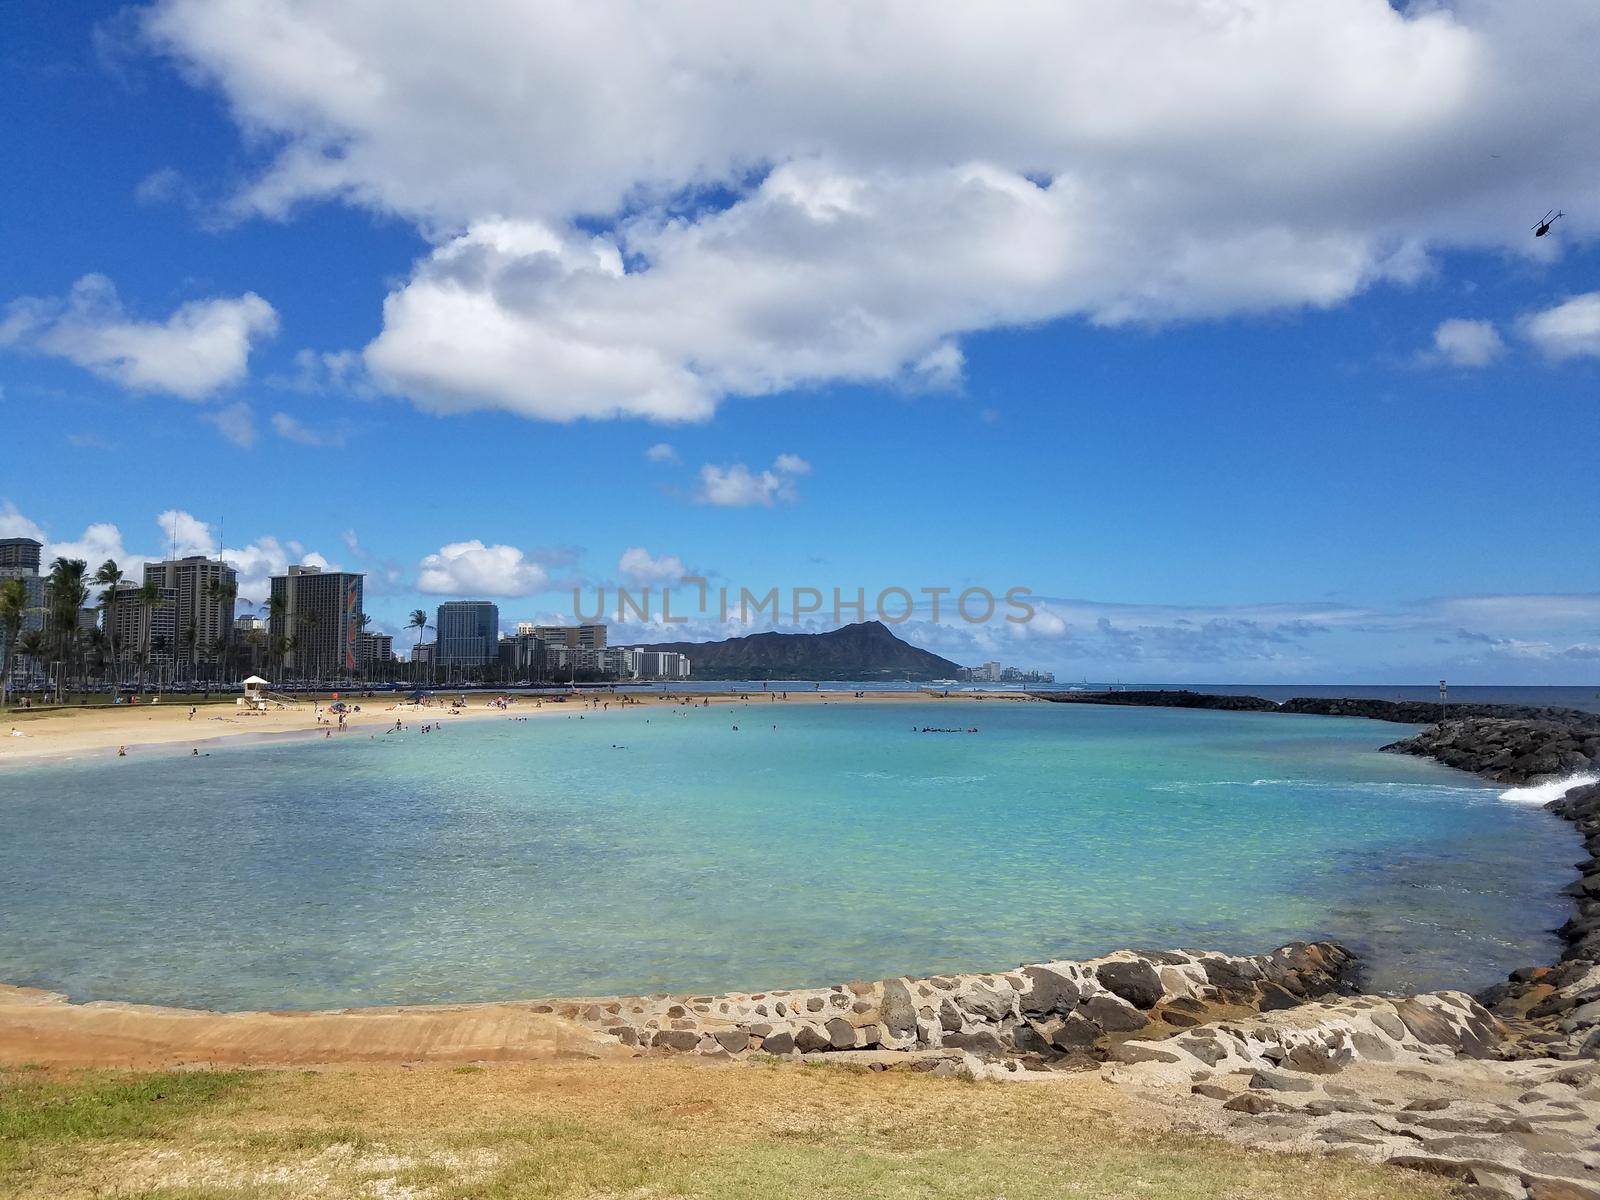 Beach on Magic Island in Ala Moana Beach Park on the island of Oahu, Hawaii.  Waikiki and Diamond Head in the distance and helicopter in the air on a beautiful day.